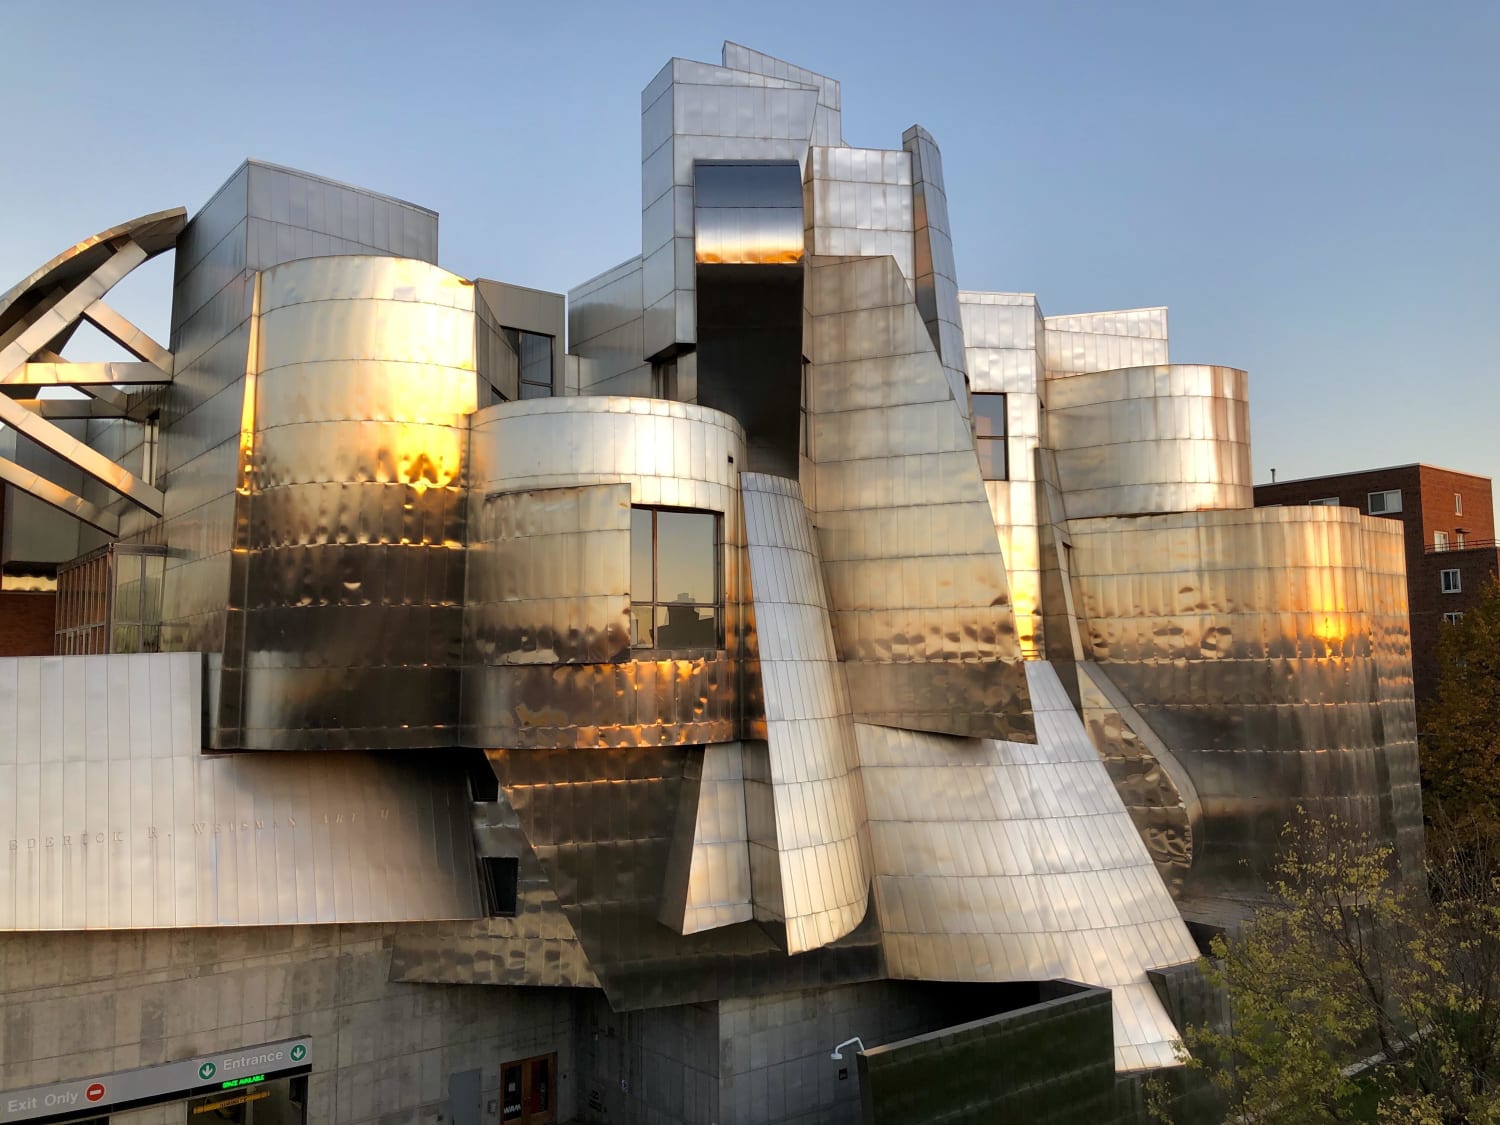 I enjoyed a view this evening of the Weisman Art Museum • designed by Frank Gehry • Minneapolis